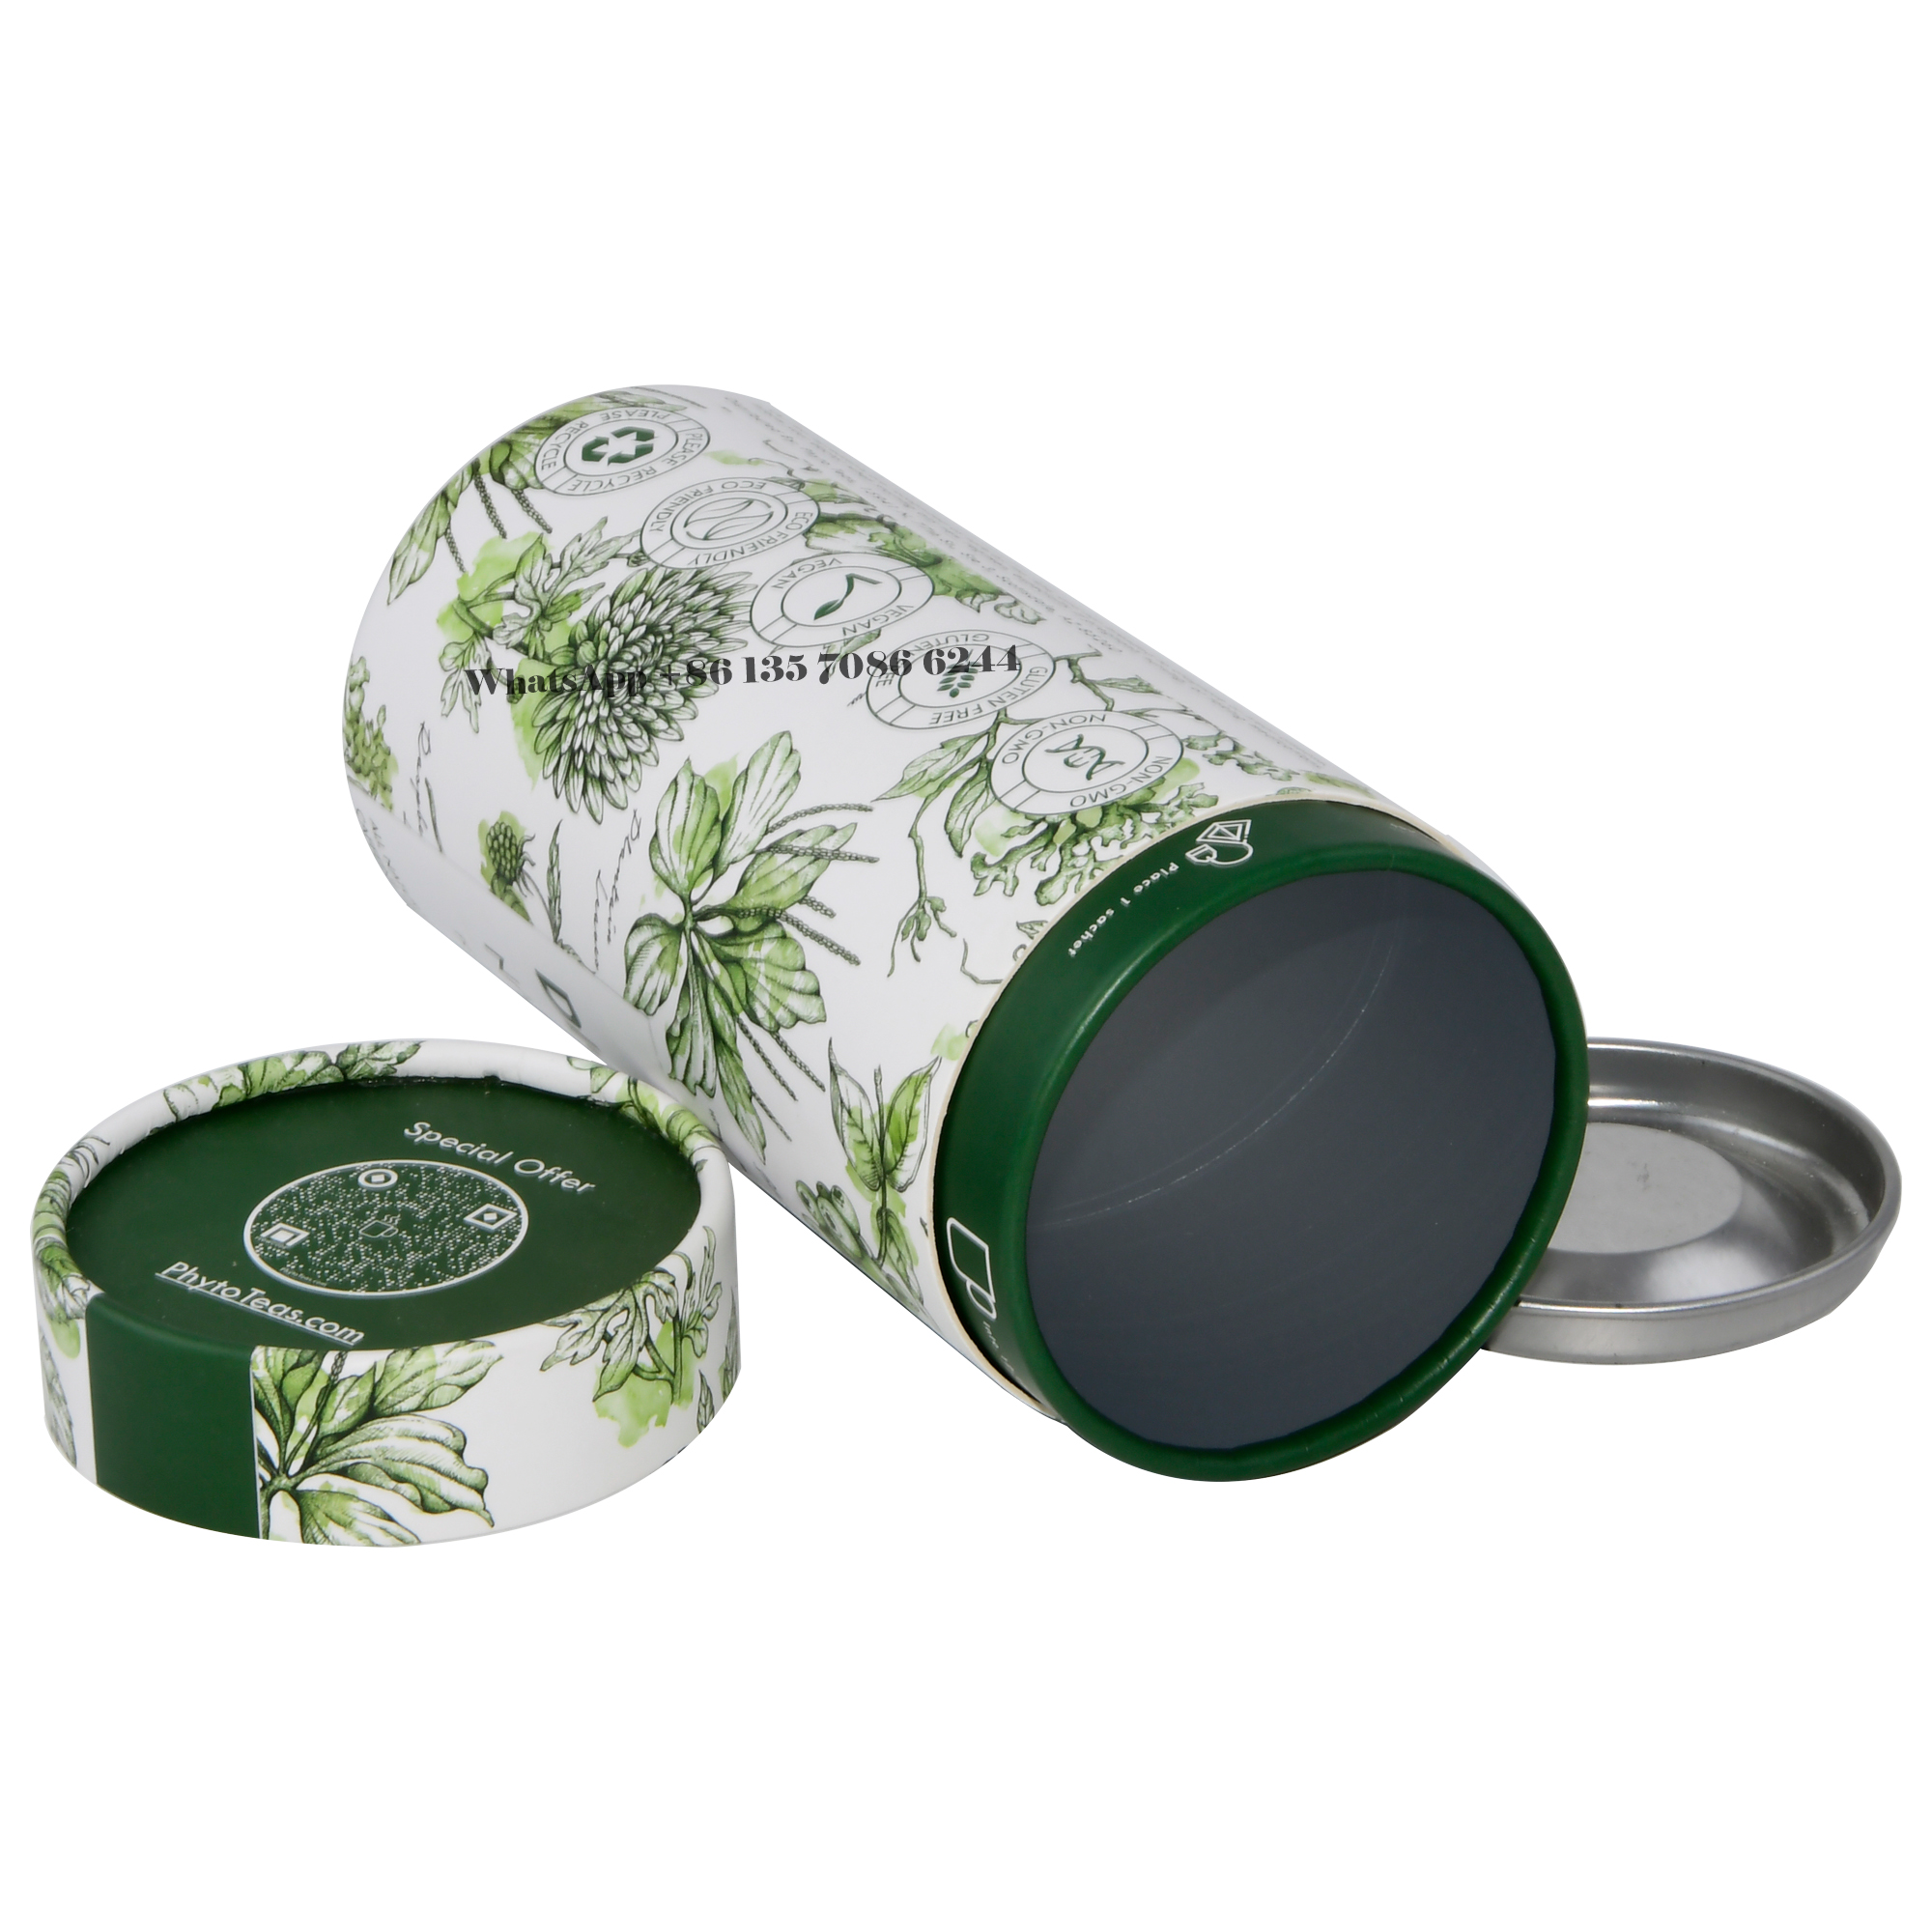  Exquisite Stylish Blend Tea Paper Tube Packaging Round Box  